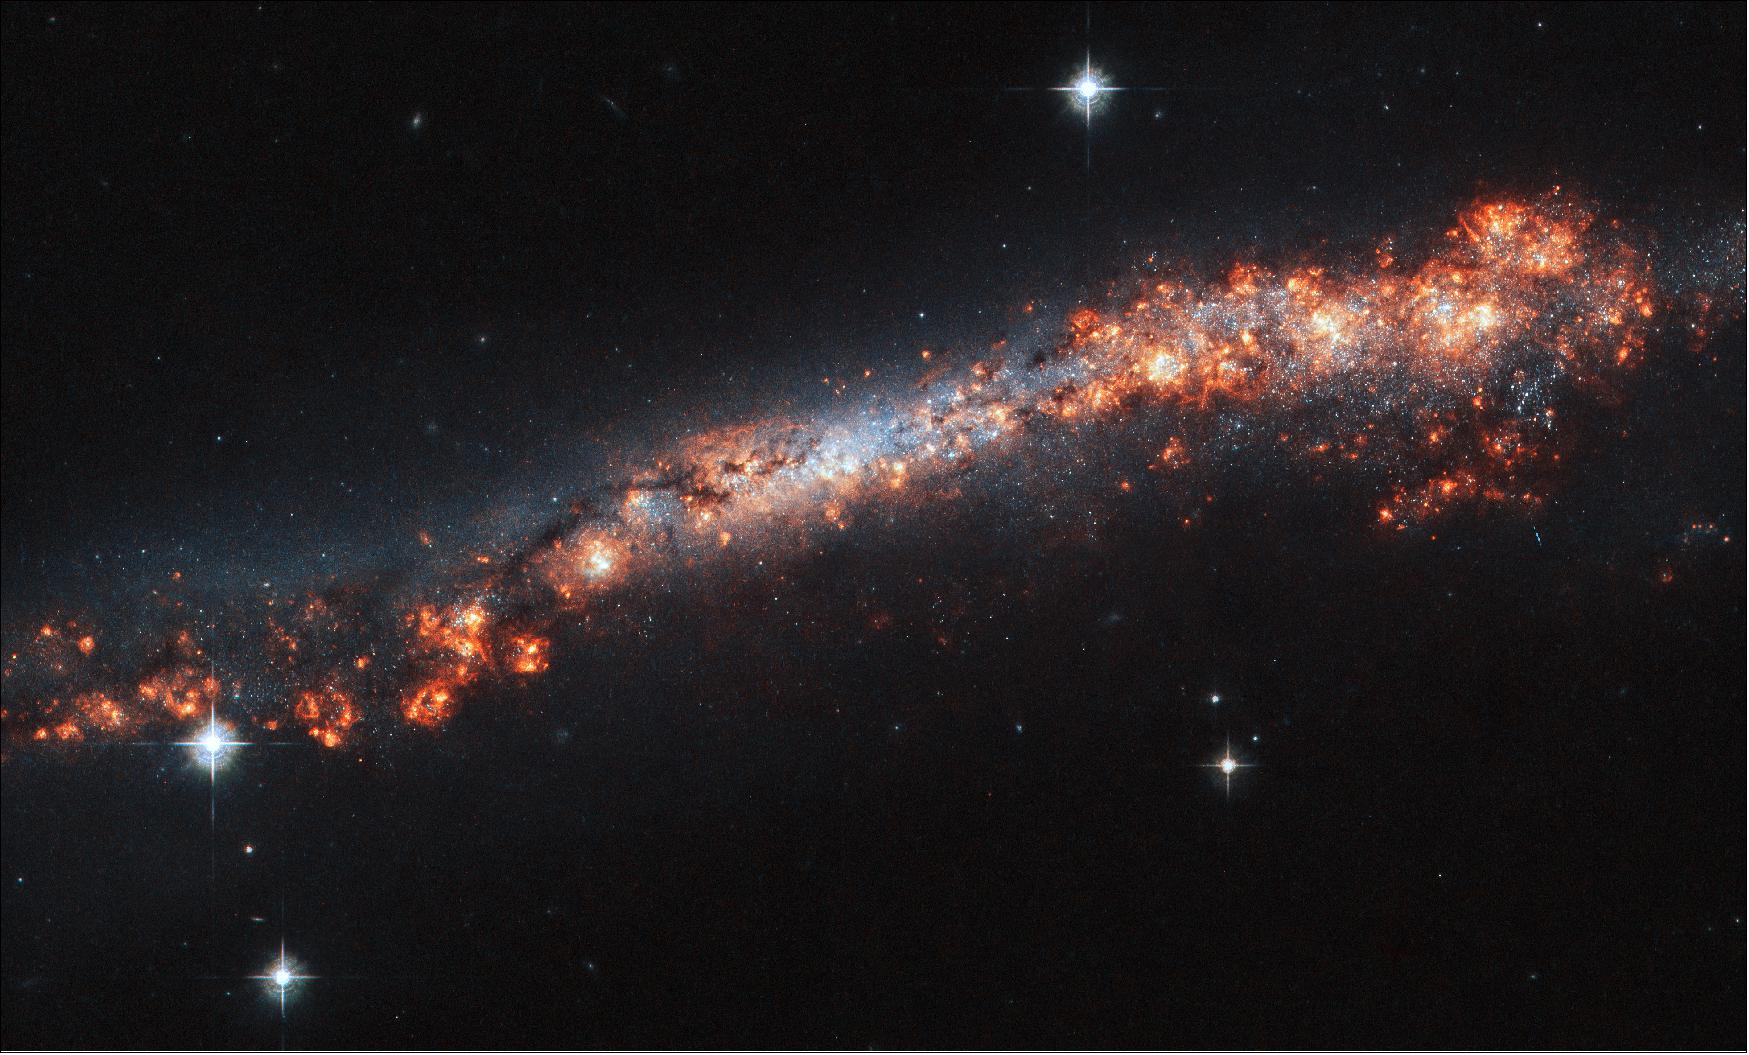 Figure 33: It turns out that we see this galaxy, named NGC 3432, orientated directly edge-on to us from our vantage point here on Earth. The galaxy’s spiral arms and bright core are hidden, and we instead see the thin strip of its very outer reaches. Dark bands of cosmic dust, patches of varying brightness, and pink regions of star formation help with making out the true shape of NGC 3432 — but it’s still somewhat of a challenge! Because observatories such as the NASA/ESA Hubble Space Telescope have seen spiral galaxies at every kind of orientation, astronomers can tell when we happen to have caught one from the side (image credit: ESA/Hubble & NASA, A. Filippenko, R. Jansen; CC BY 4.0)